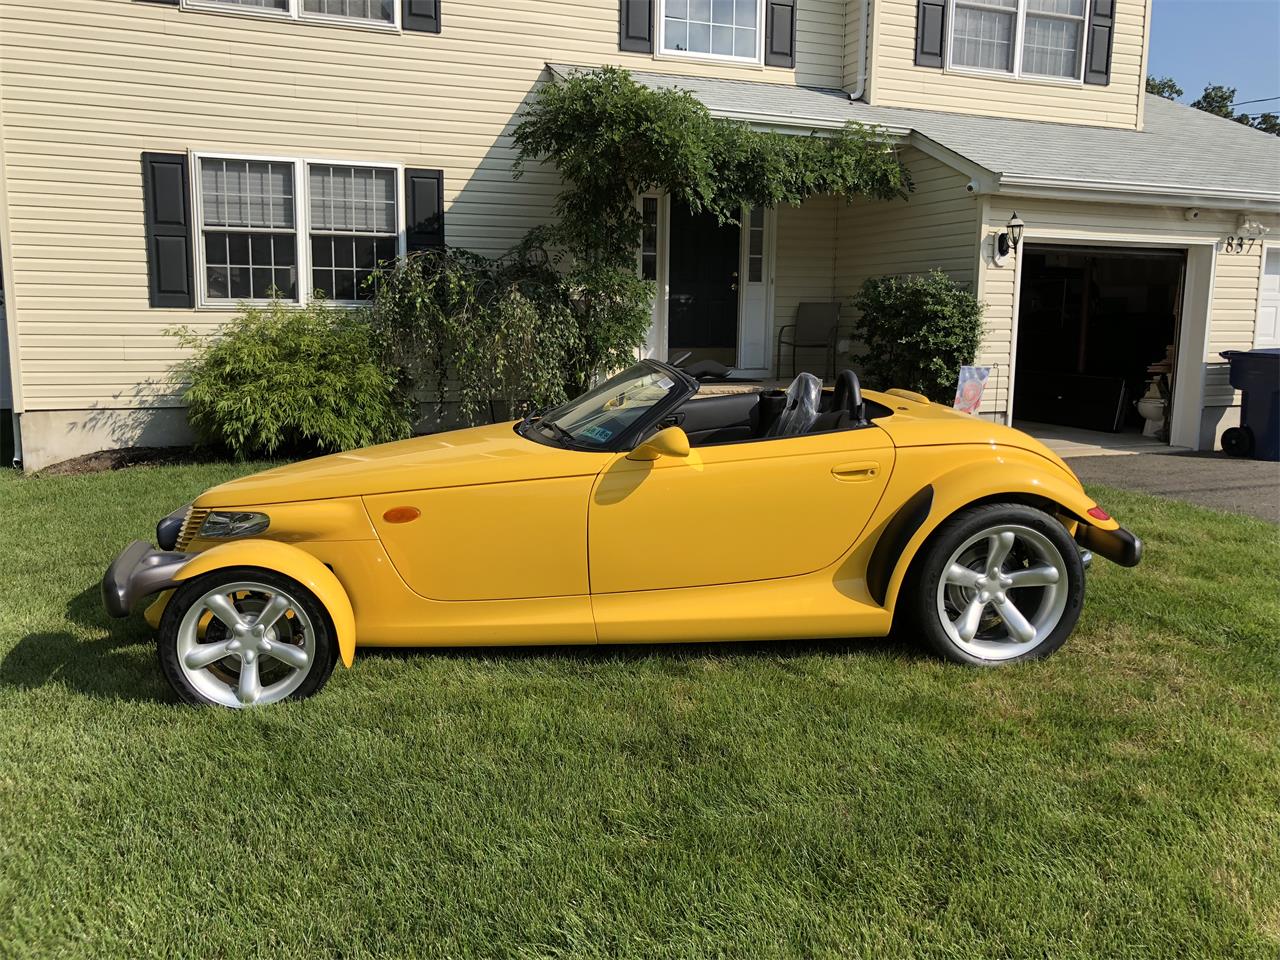 1999 Plymouth Prowler for Sale | ClassicCars.com | CC-1130702